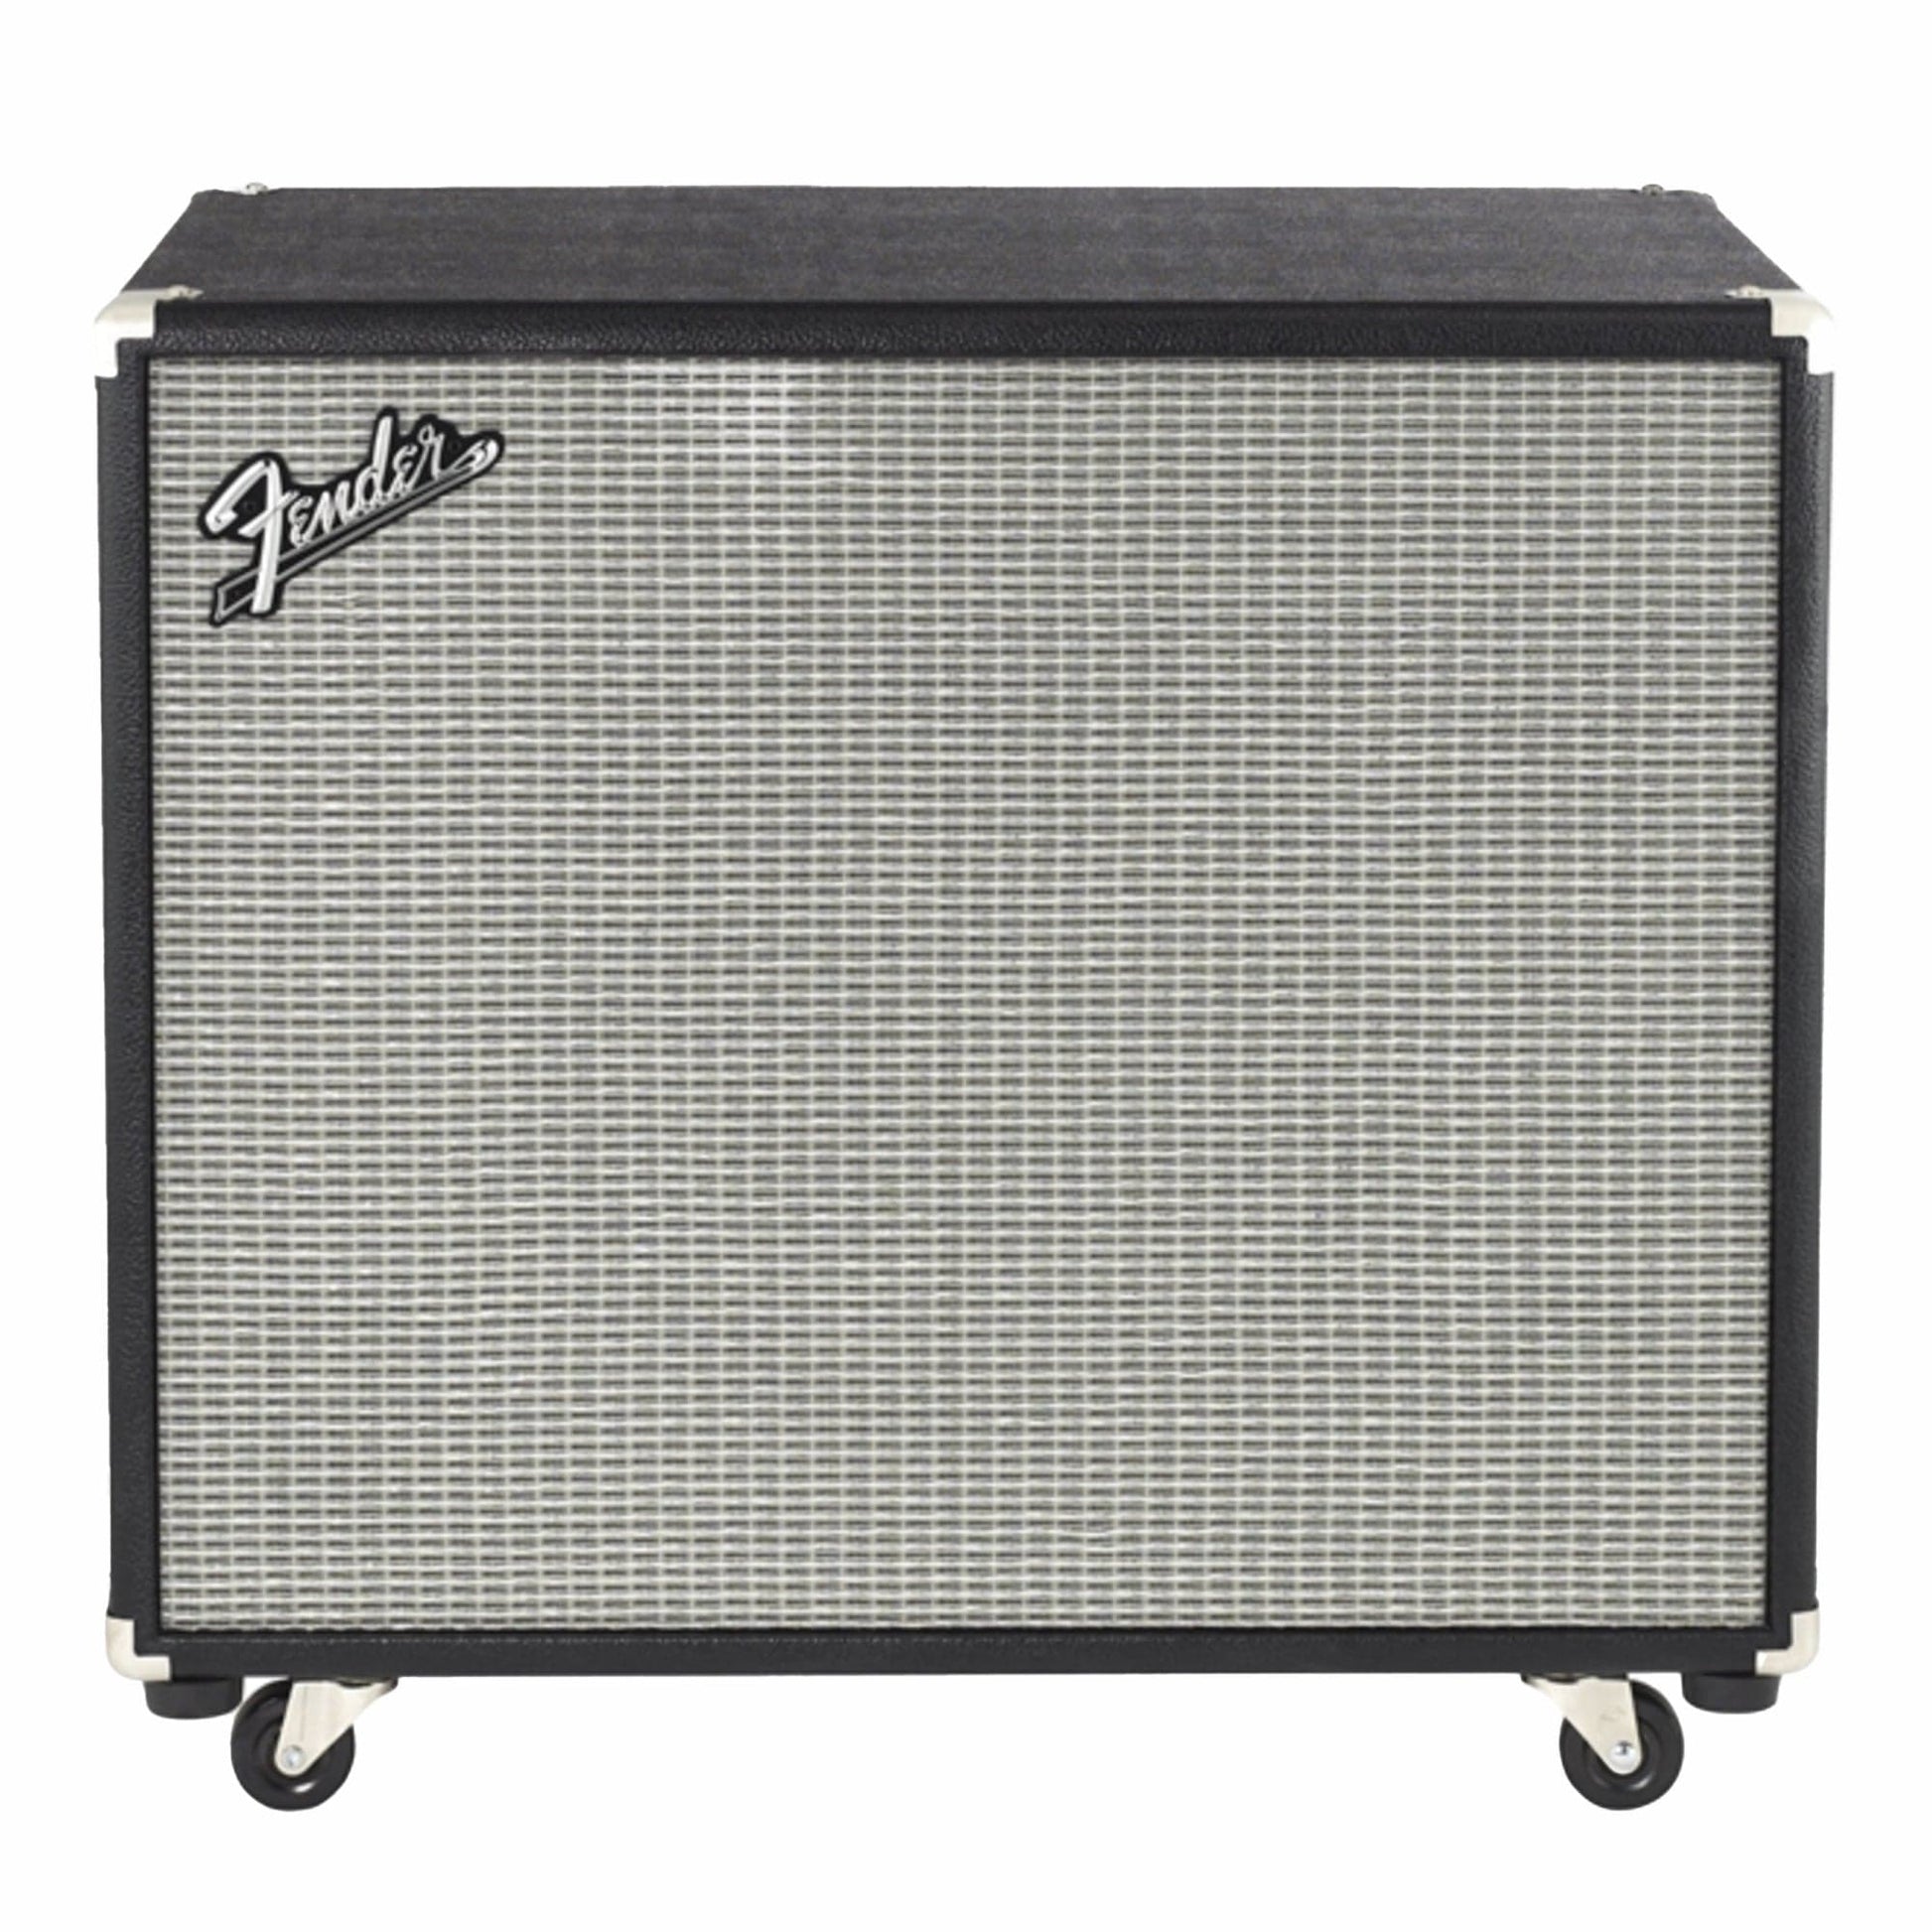 Fender Bassman 115 Neo Cabinet Amps / Bass Cabinets